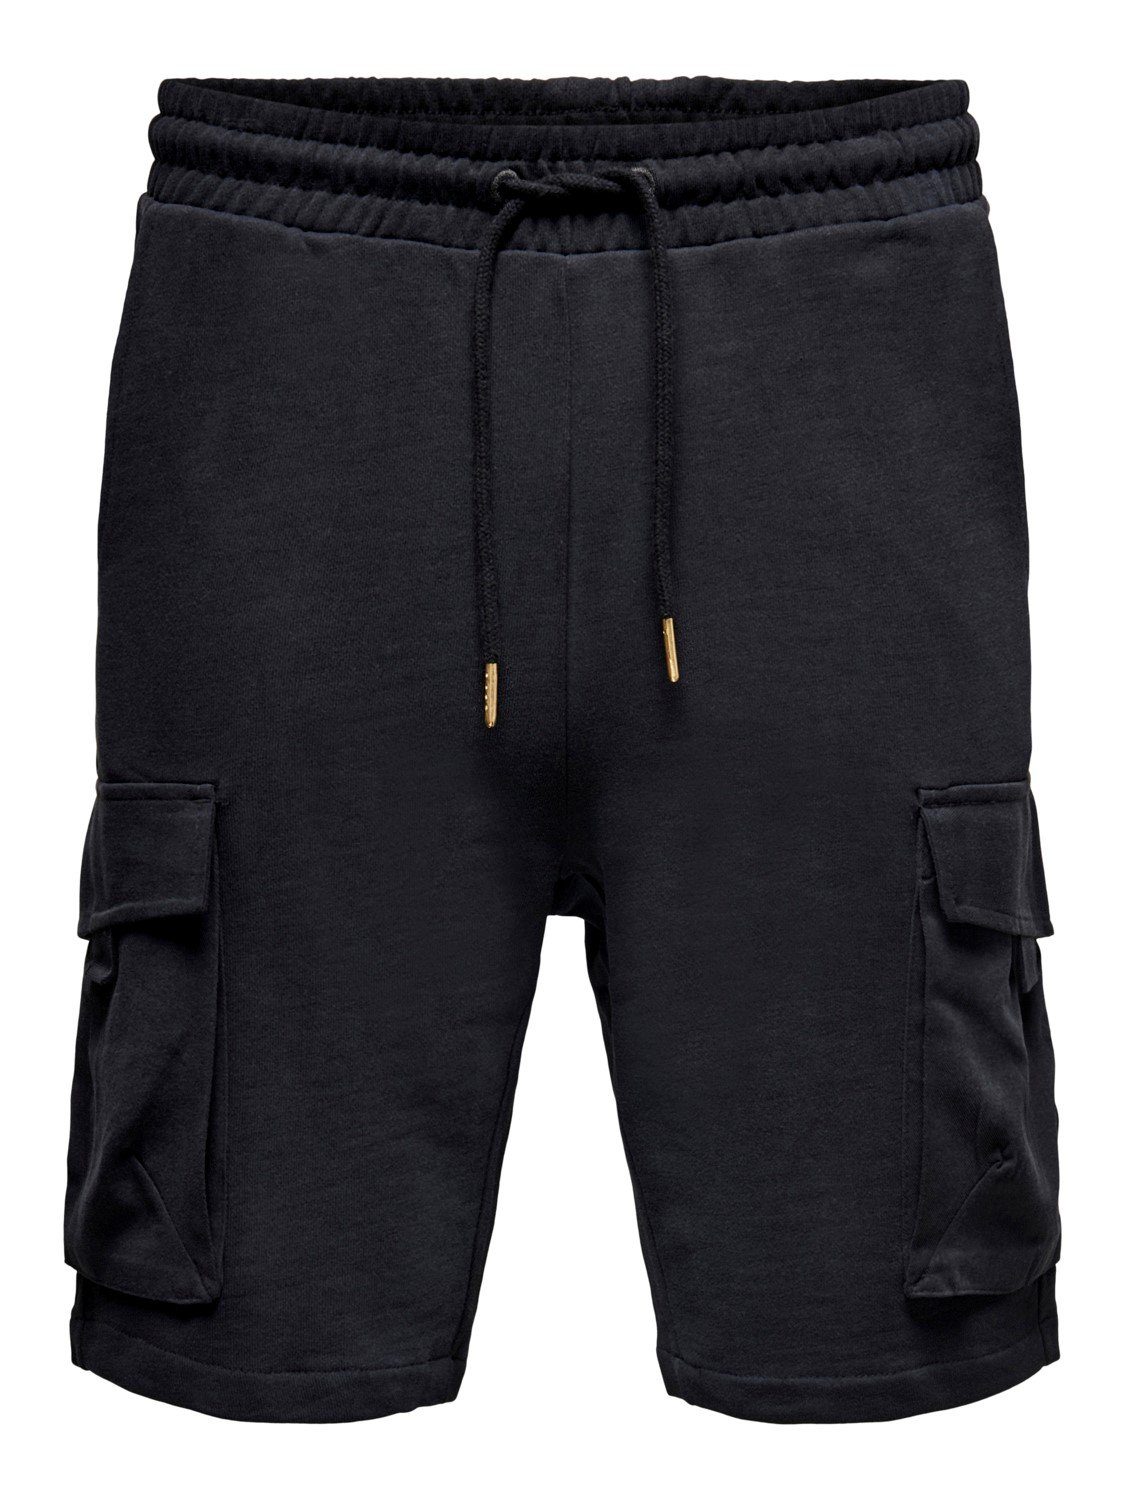 ONLY & Baumwolle ONSNICKY Black 22019126 aus Shorts SONS